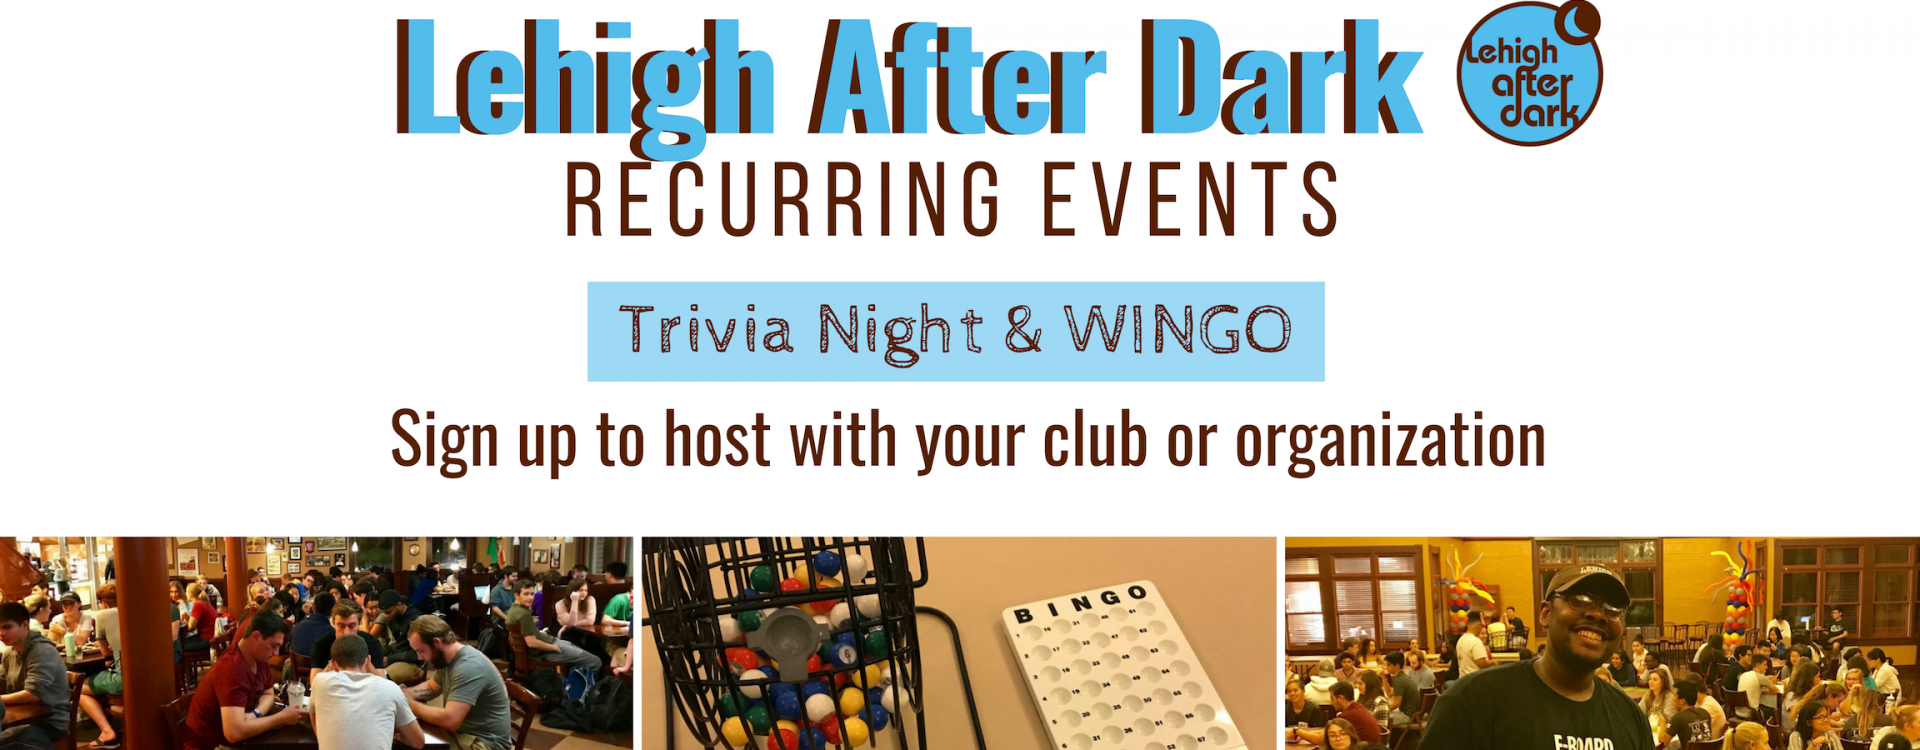 Trivia every Thursday night at 9pm and Wingo once a month- sign up to sponsor an event today!